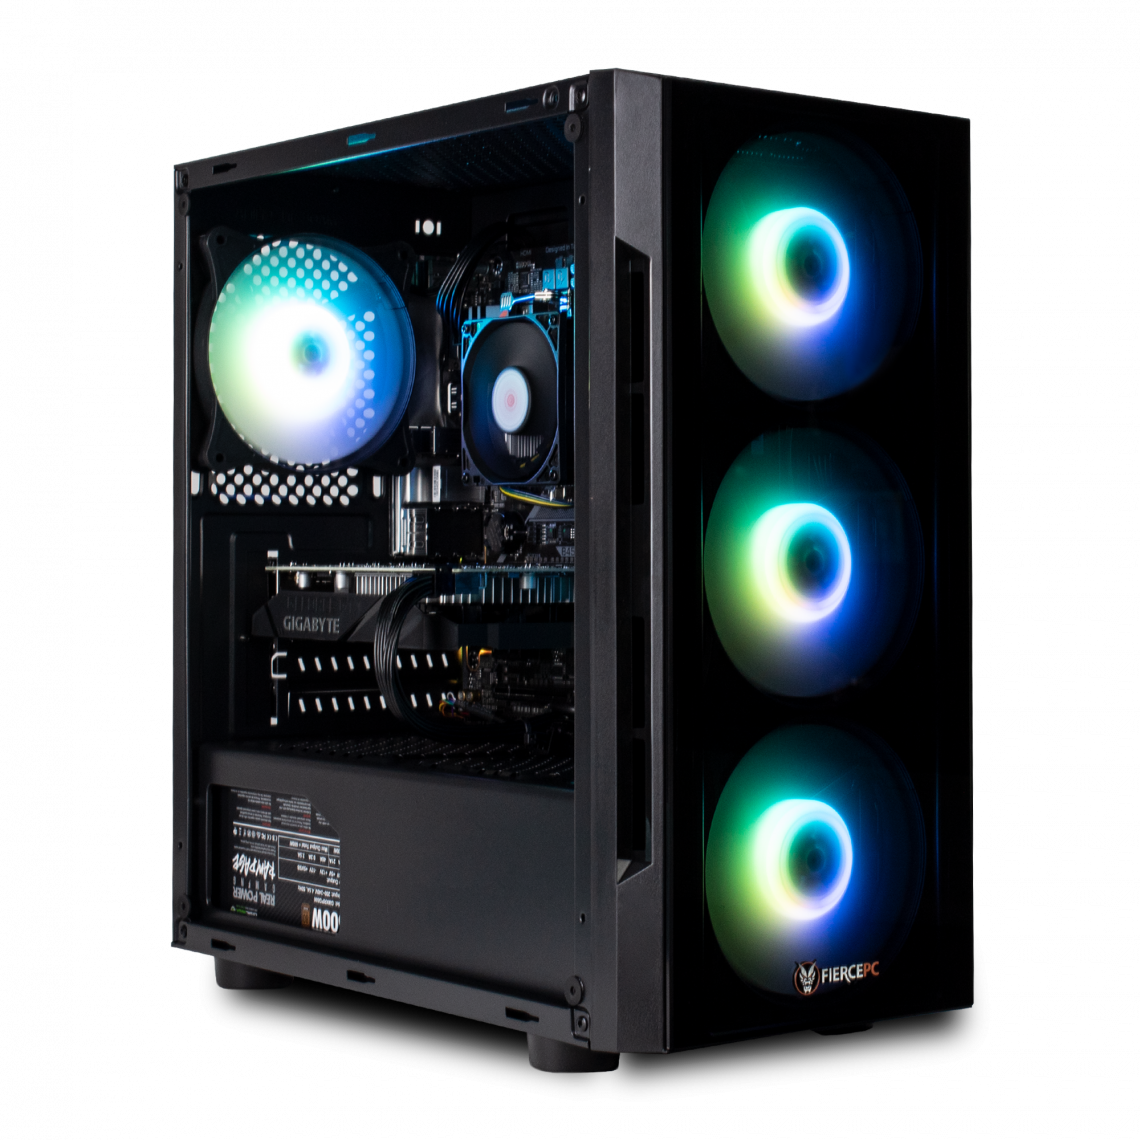 Fierce Pc - Fierce RGB Gaming PC - Ryzen 5 PRO 4650G 4,2 GHz, GTX 1650 6 Go, 16 Go 3200 MHz, 500 Go NVMe M.2 Solid State Drive, 1 To Solid State Drive, Windows 11 - PC Fixe